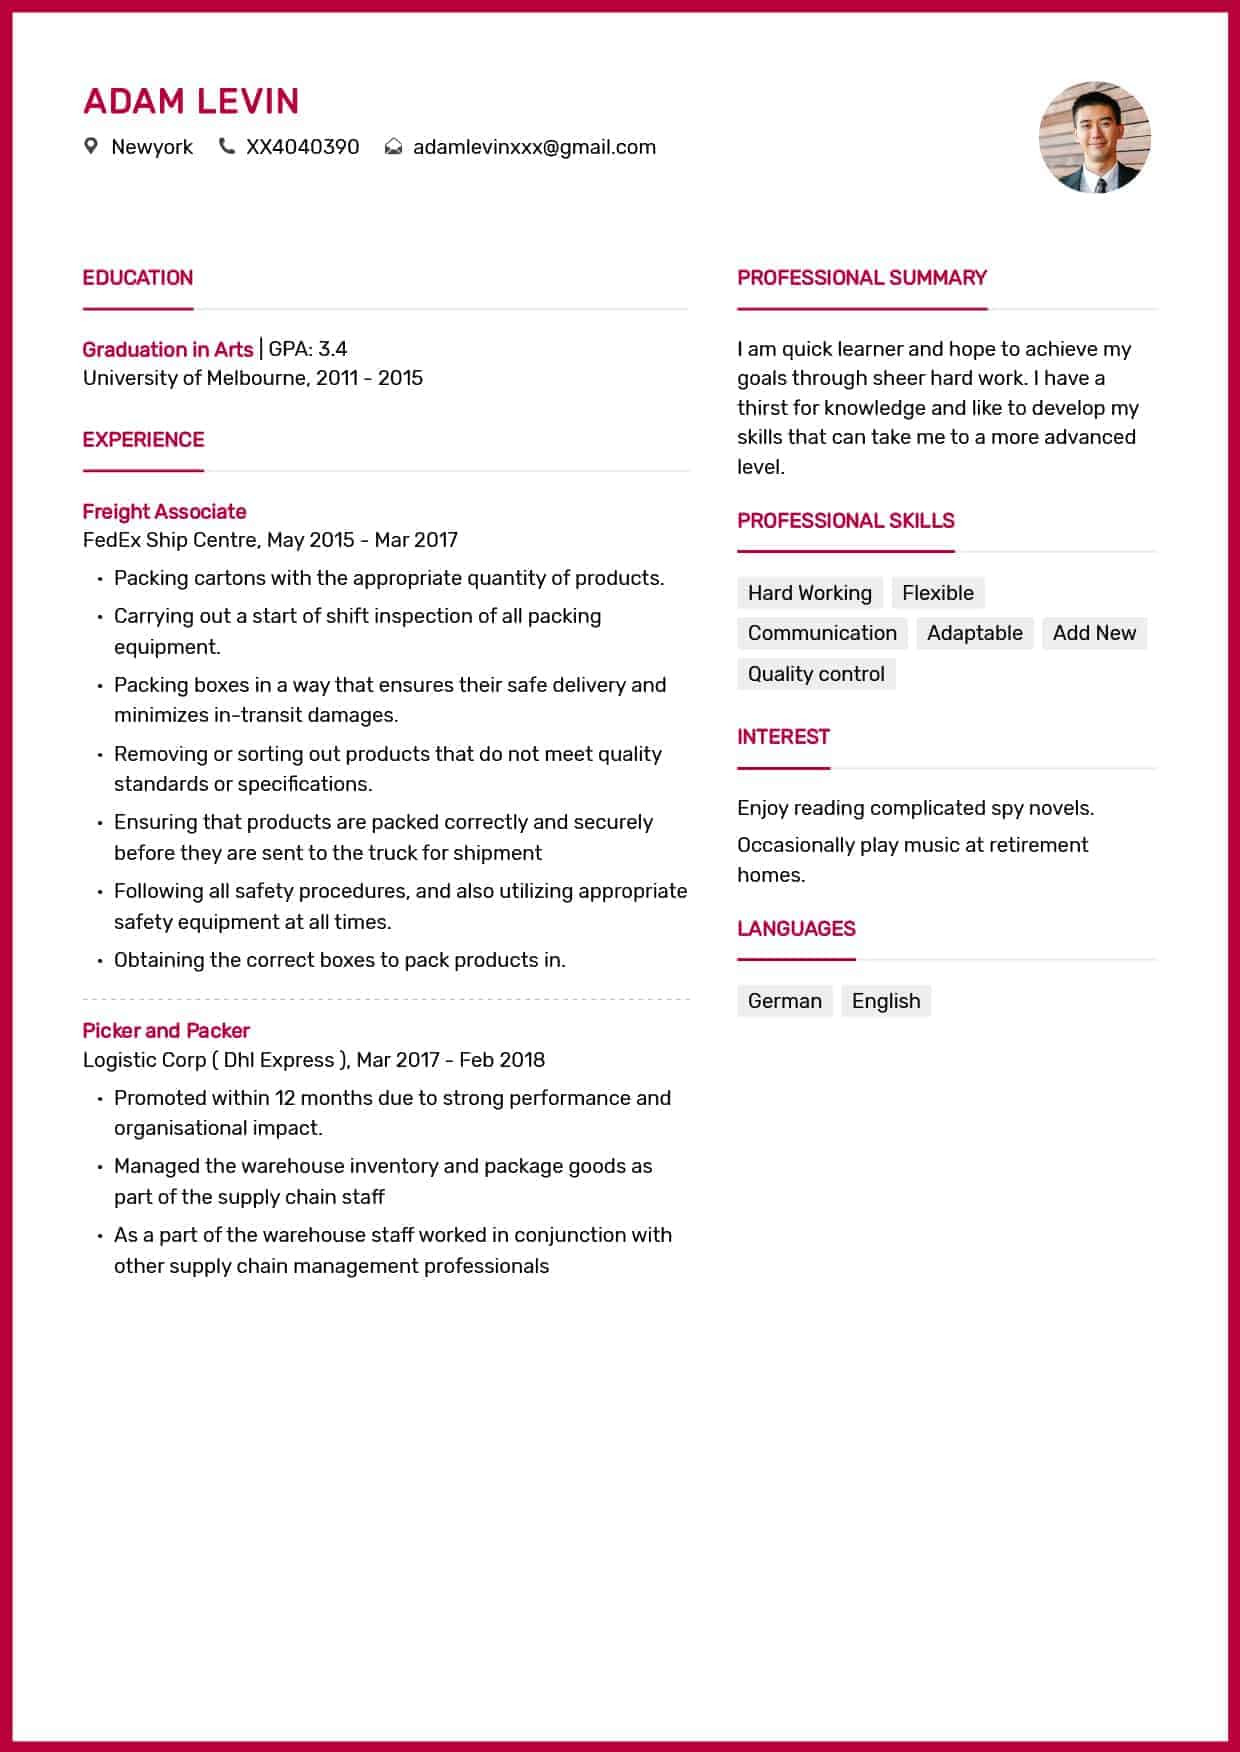 Sample Resume for Crating and Shipping Picker and Packer Resume Example, Duties & Responsibilities – My …